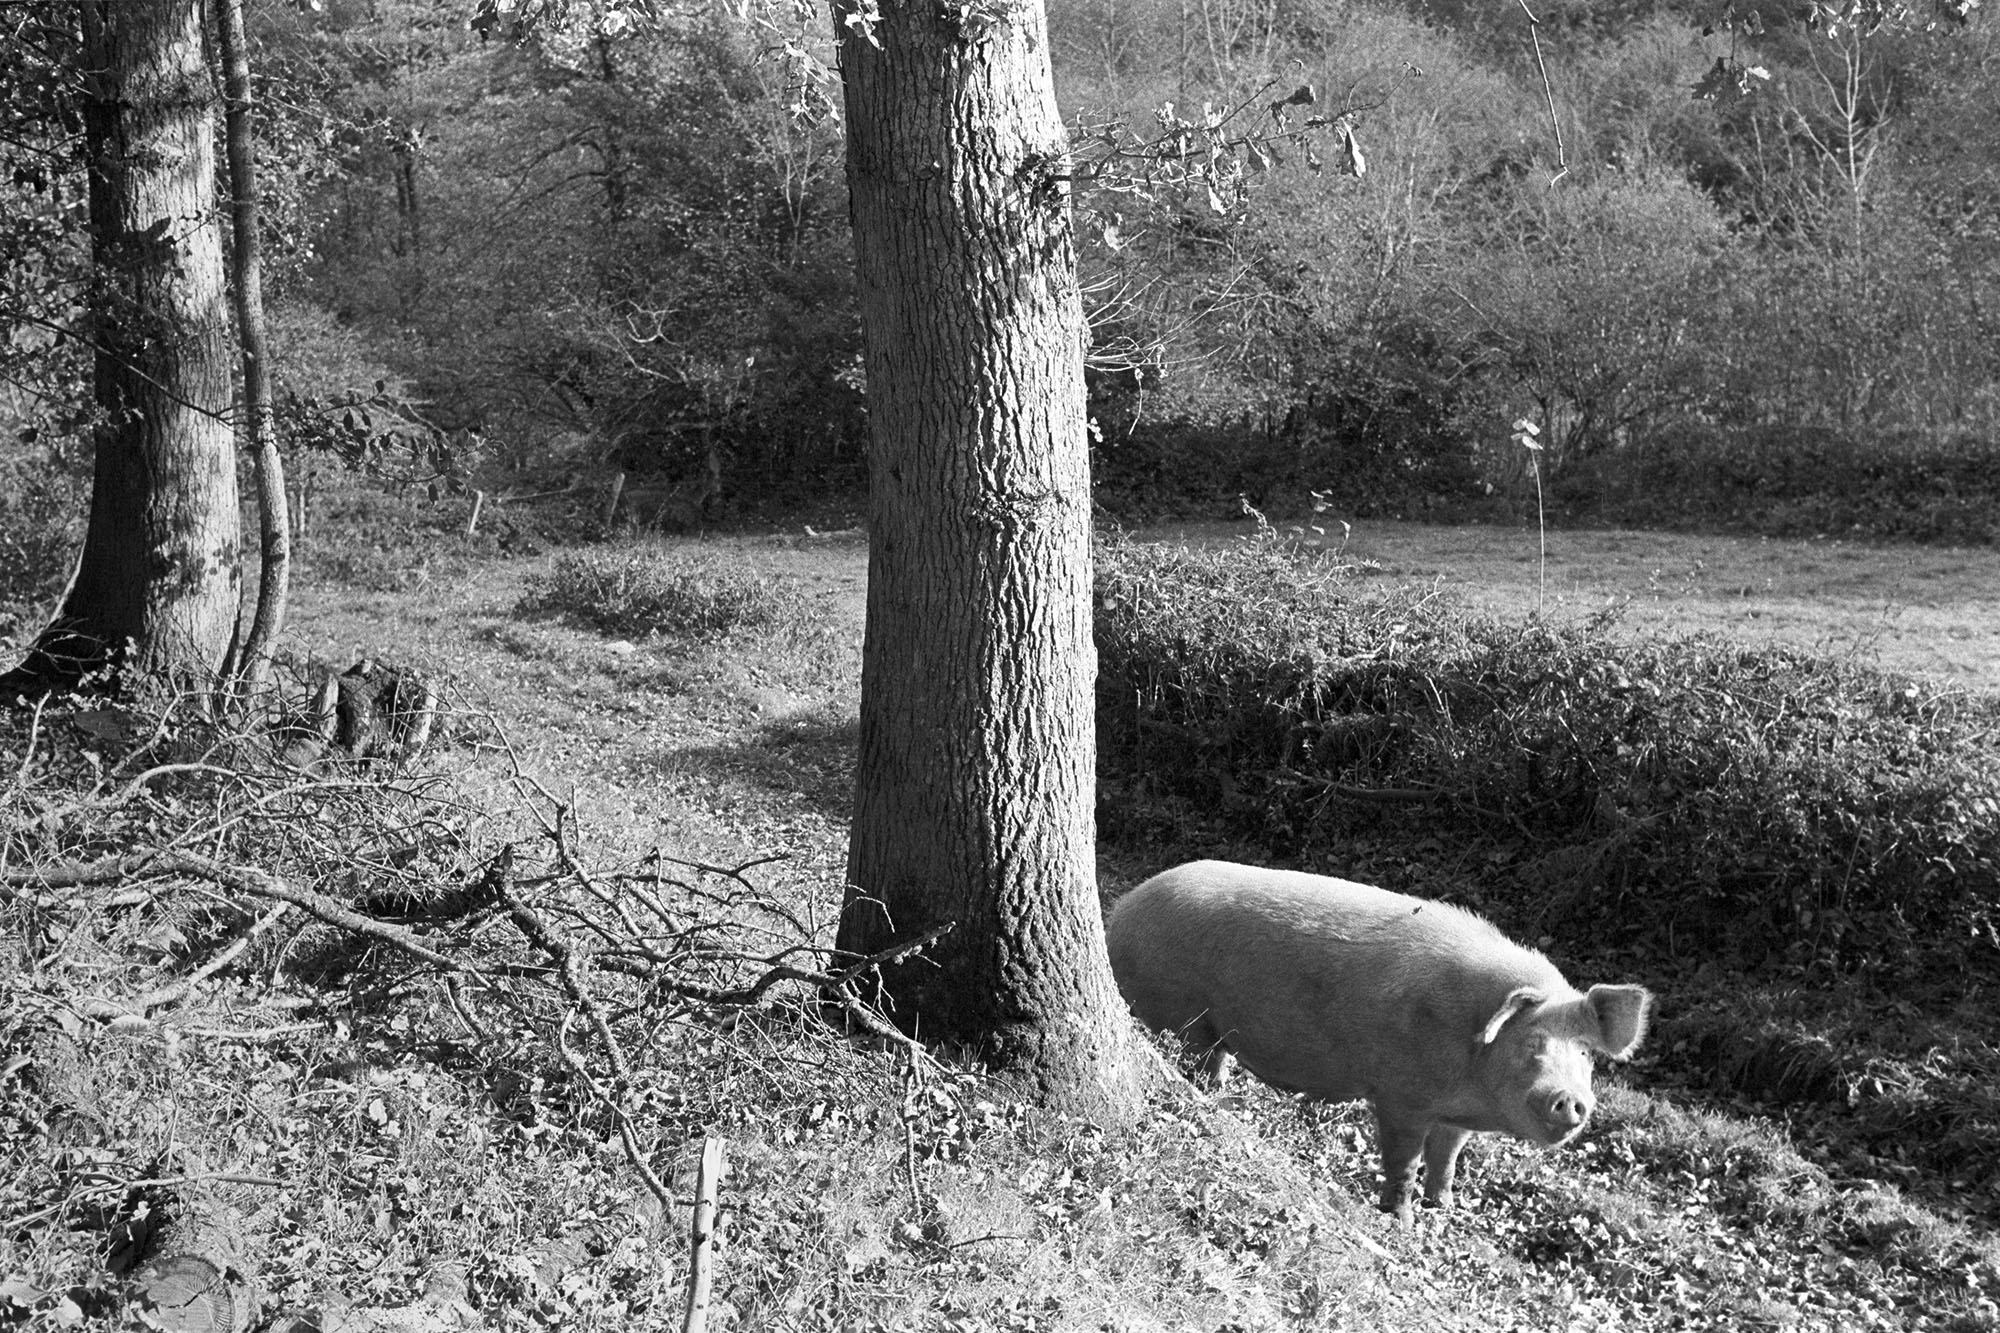 Pig at the edge of the wood by James Ravilious